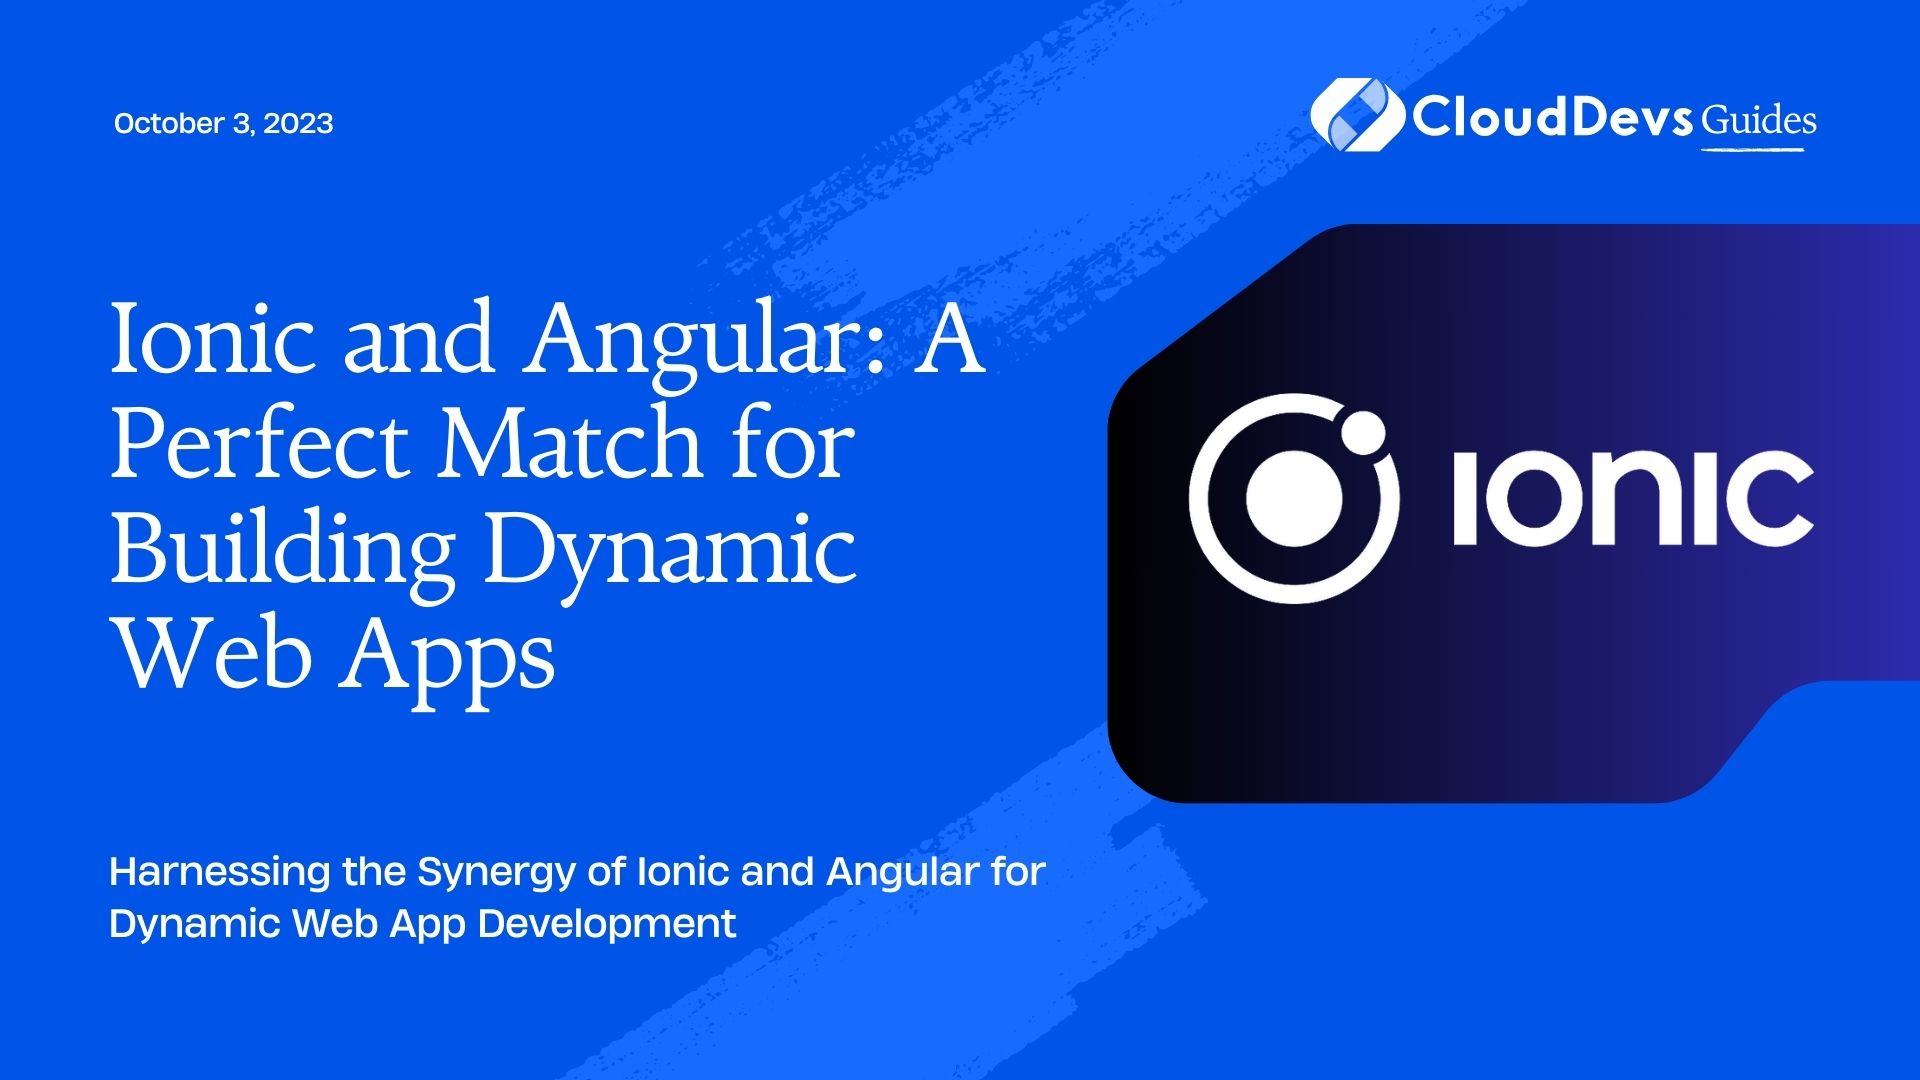 Ionic and Angular: A Perfect Match for Building Dynamic Web Apps